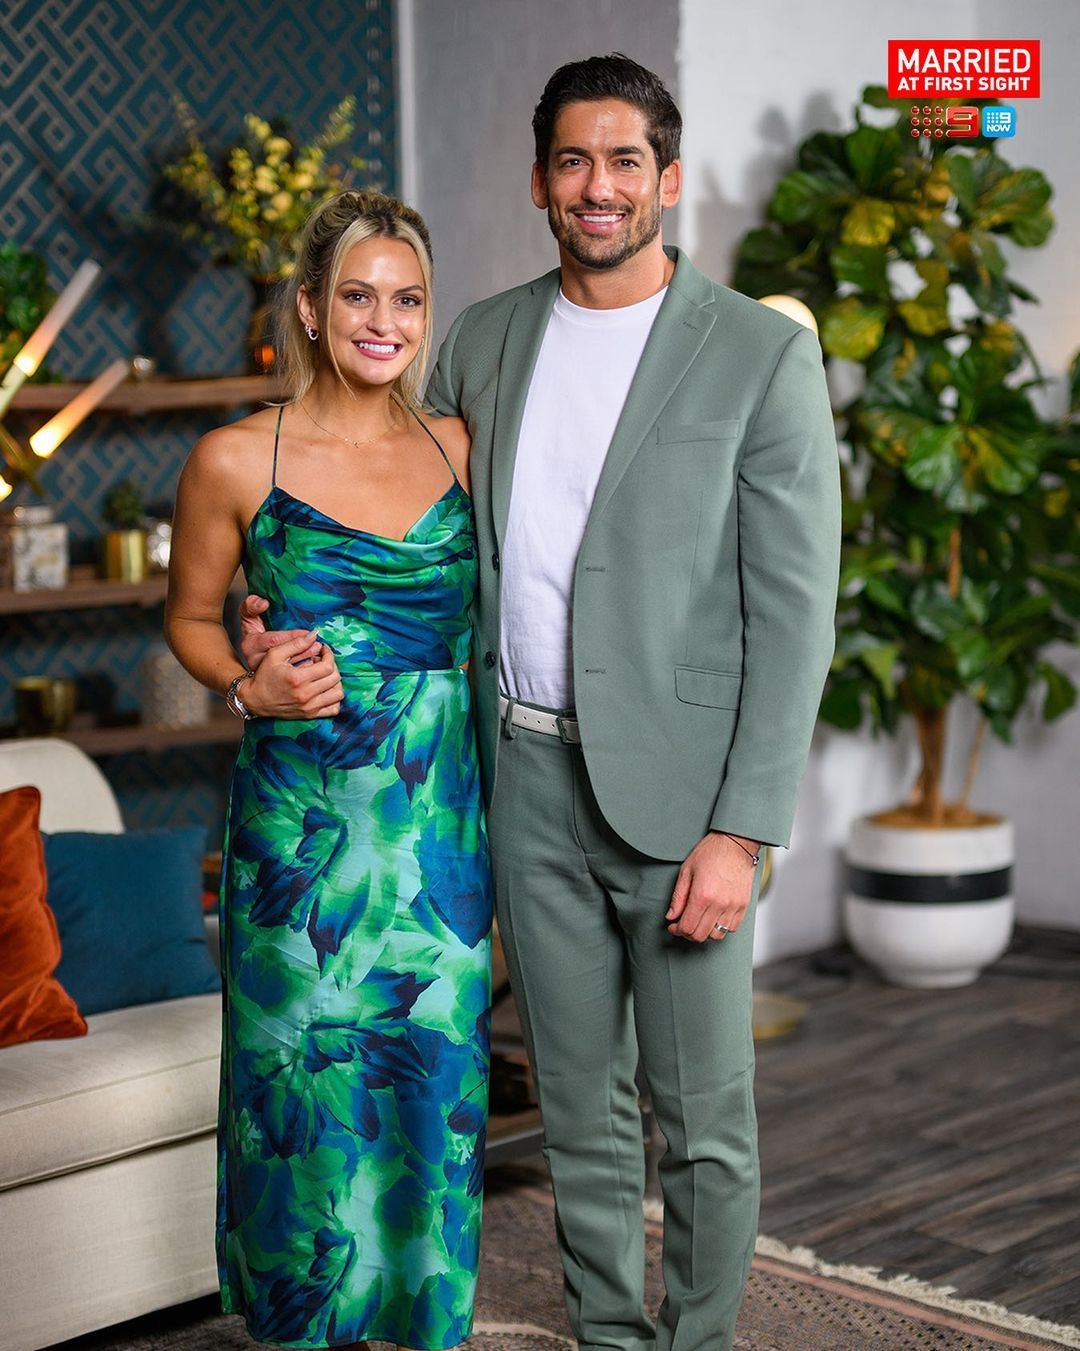 Married at First Sight Australia Are Alyssa and Duncan still together